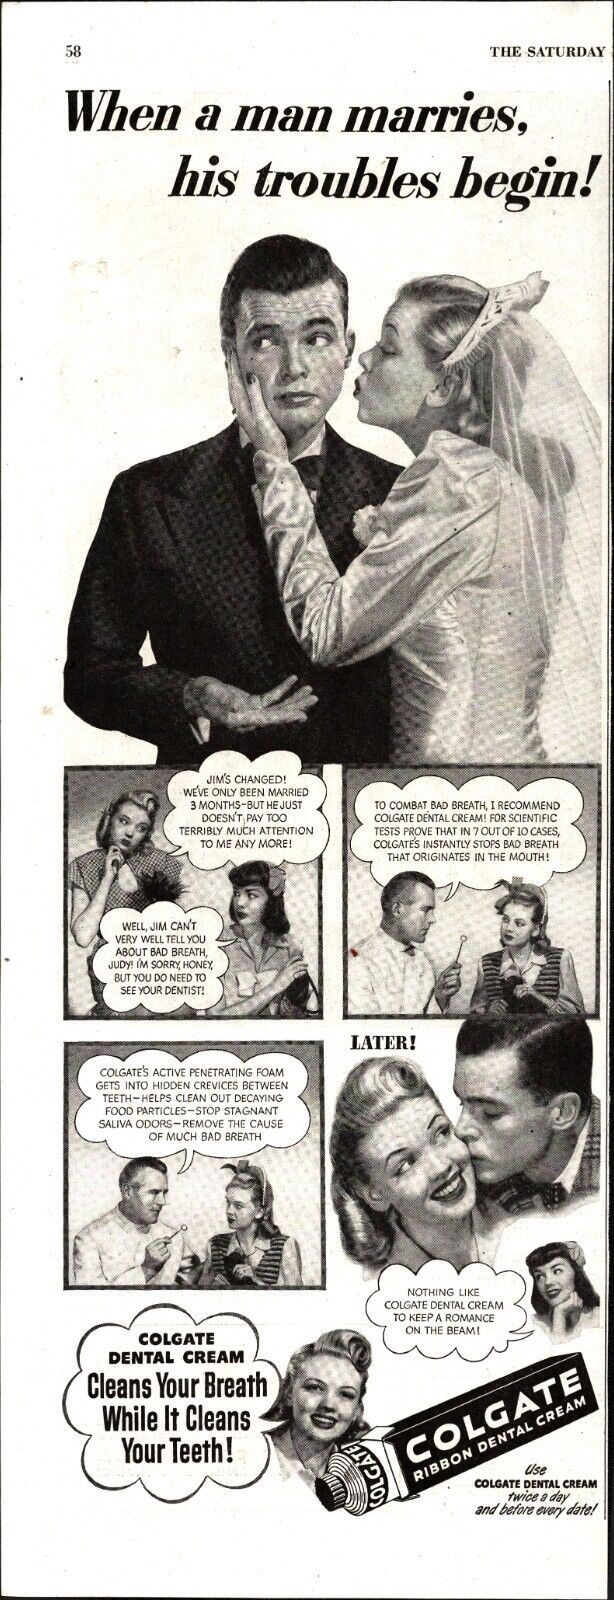 1946 Colgate Toothpaste Ad - sexy women when a man marries e8